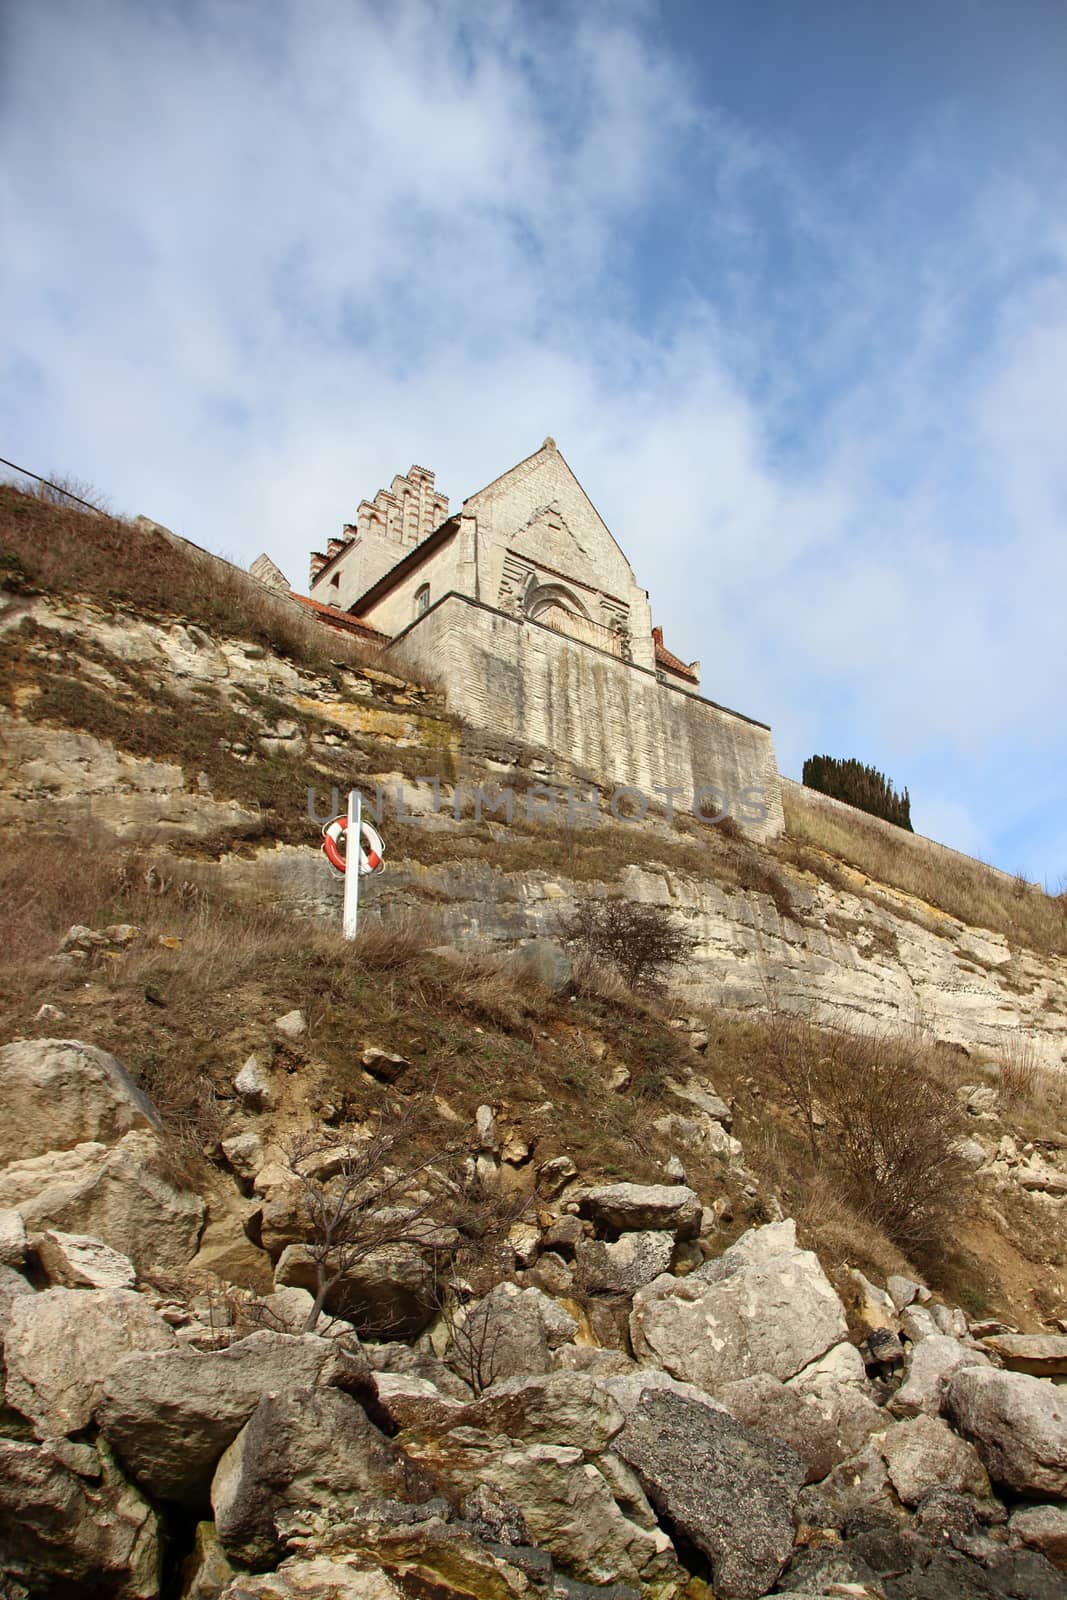 Church at Stevn Klint edge of Cliff with Lifesaver Ring and White Clouds